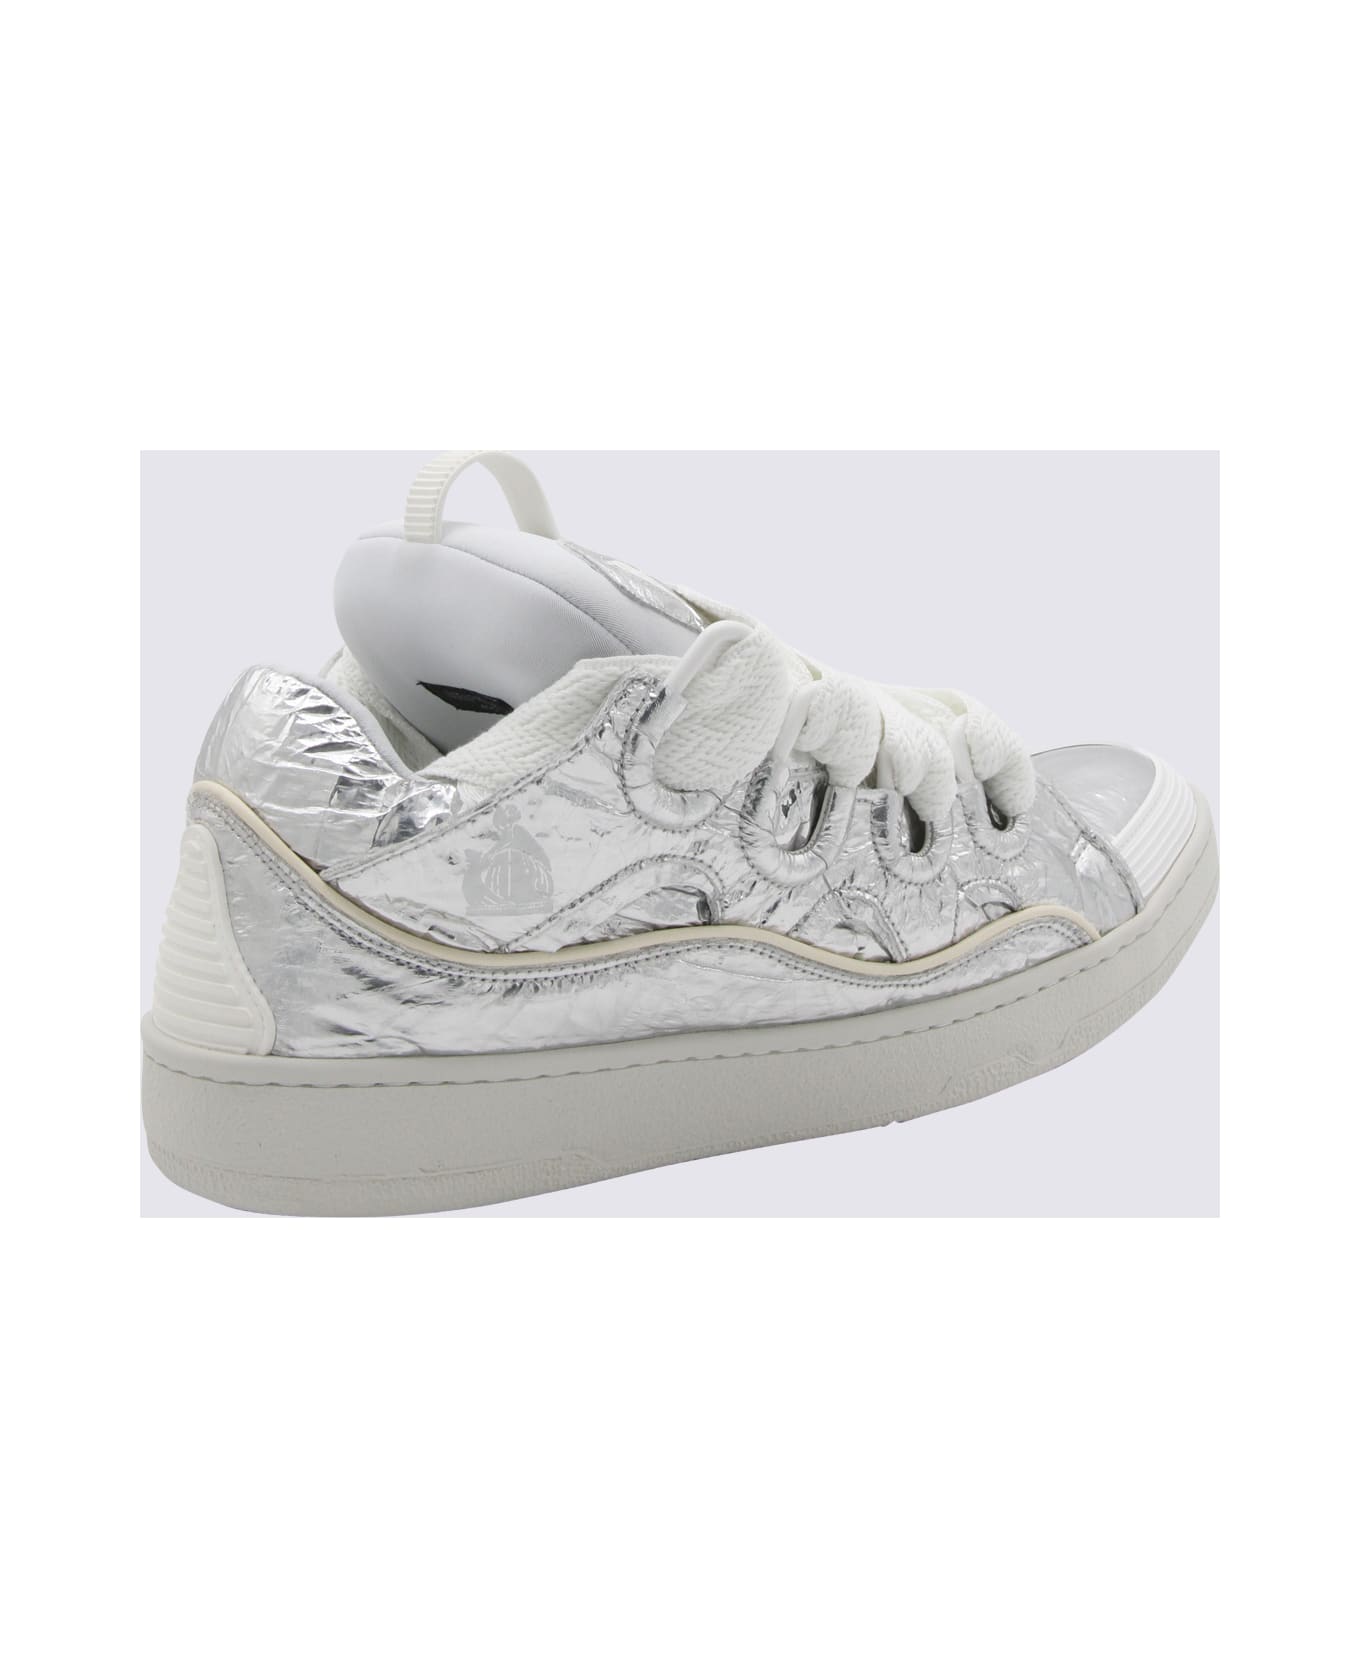 Lanvin Silver Leather Curb Sneakers - Silver